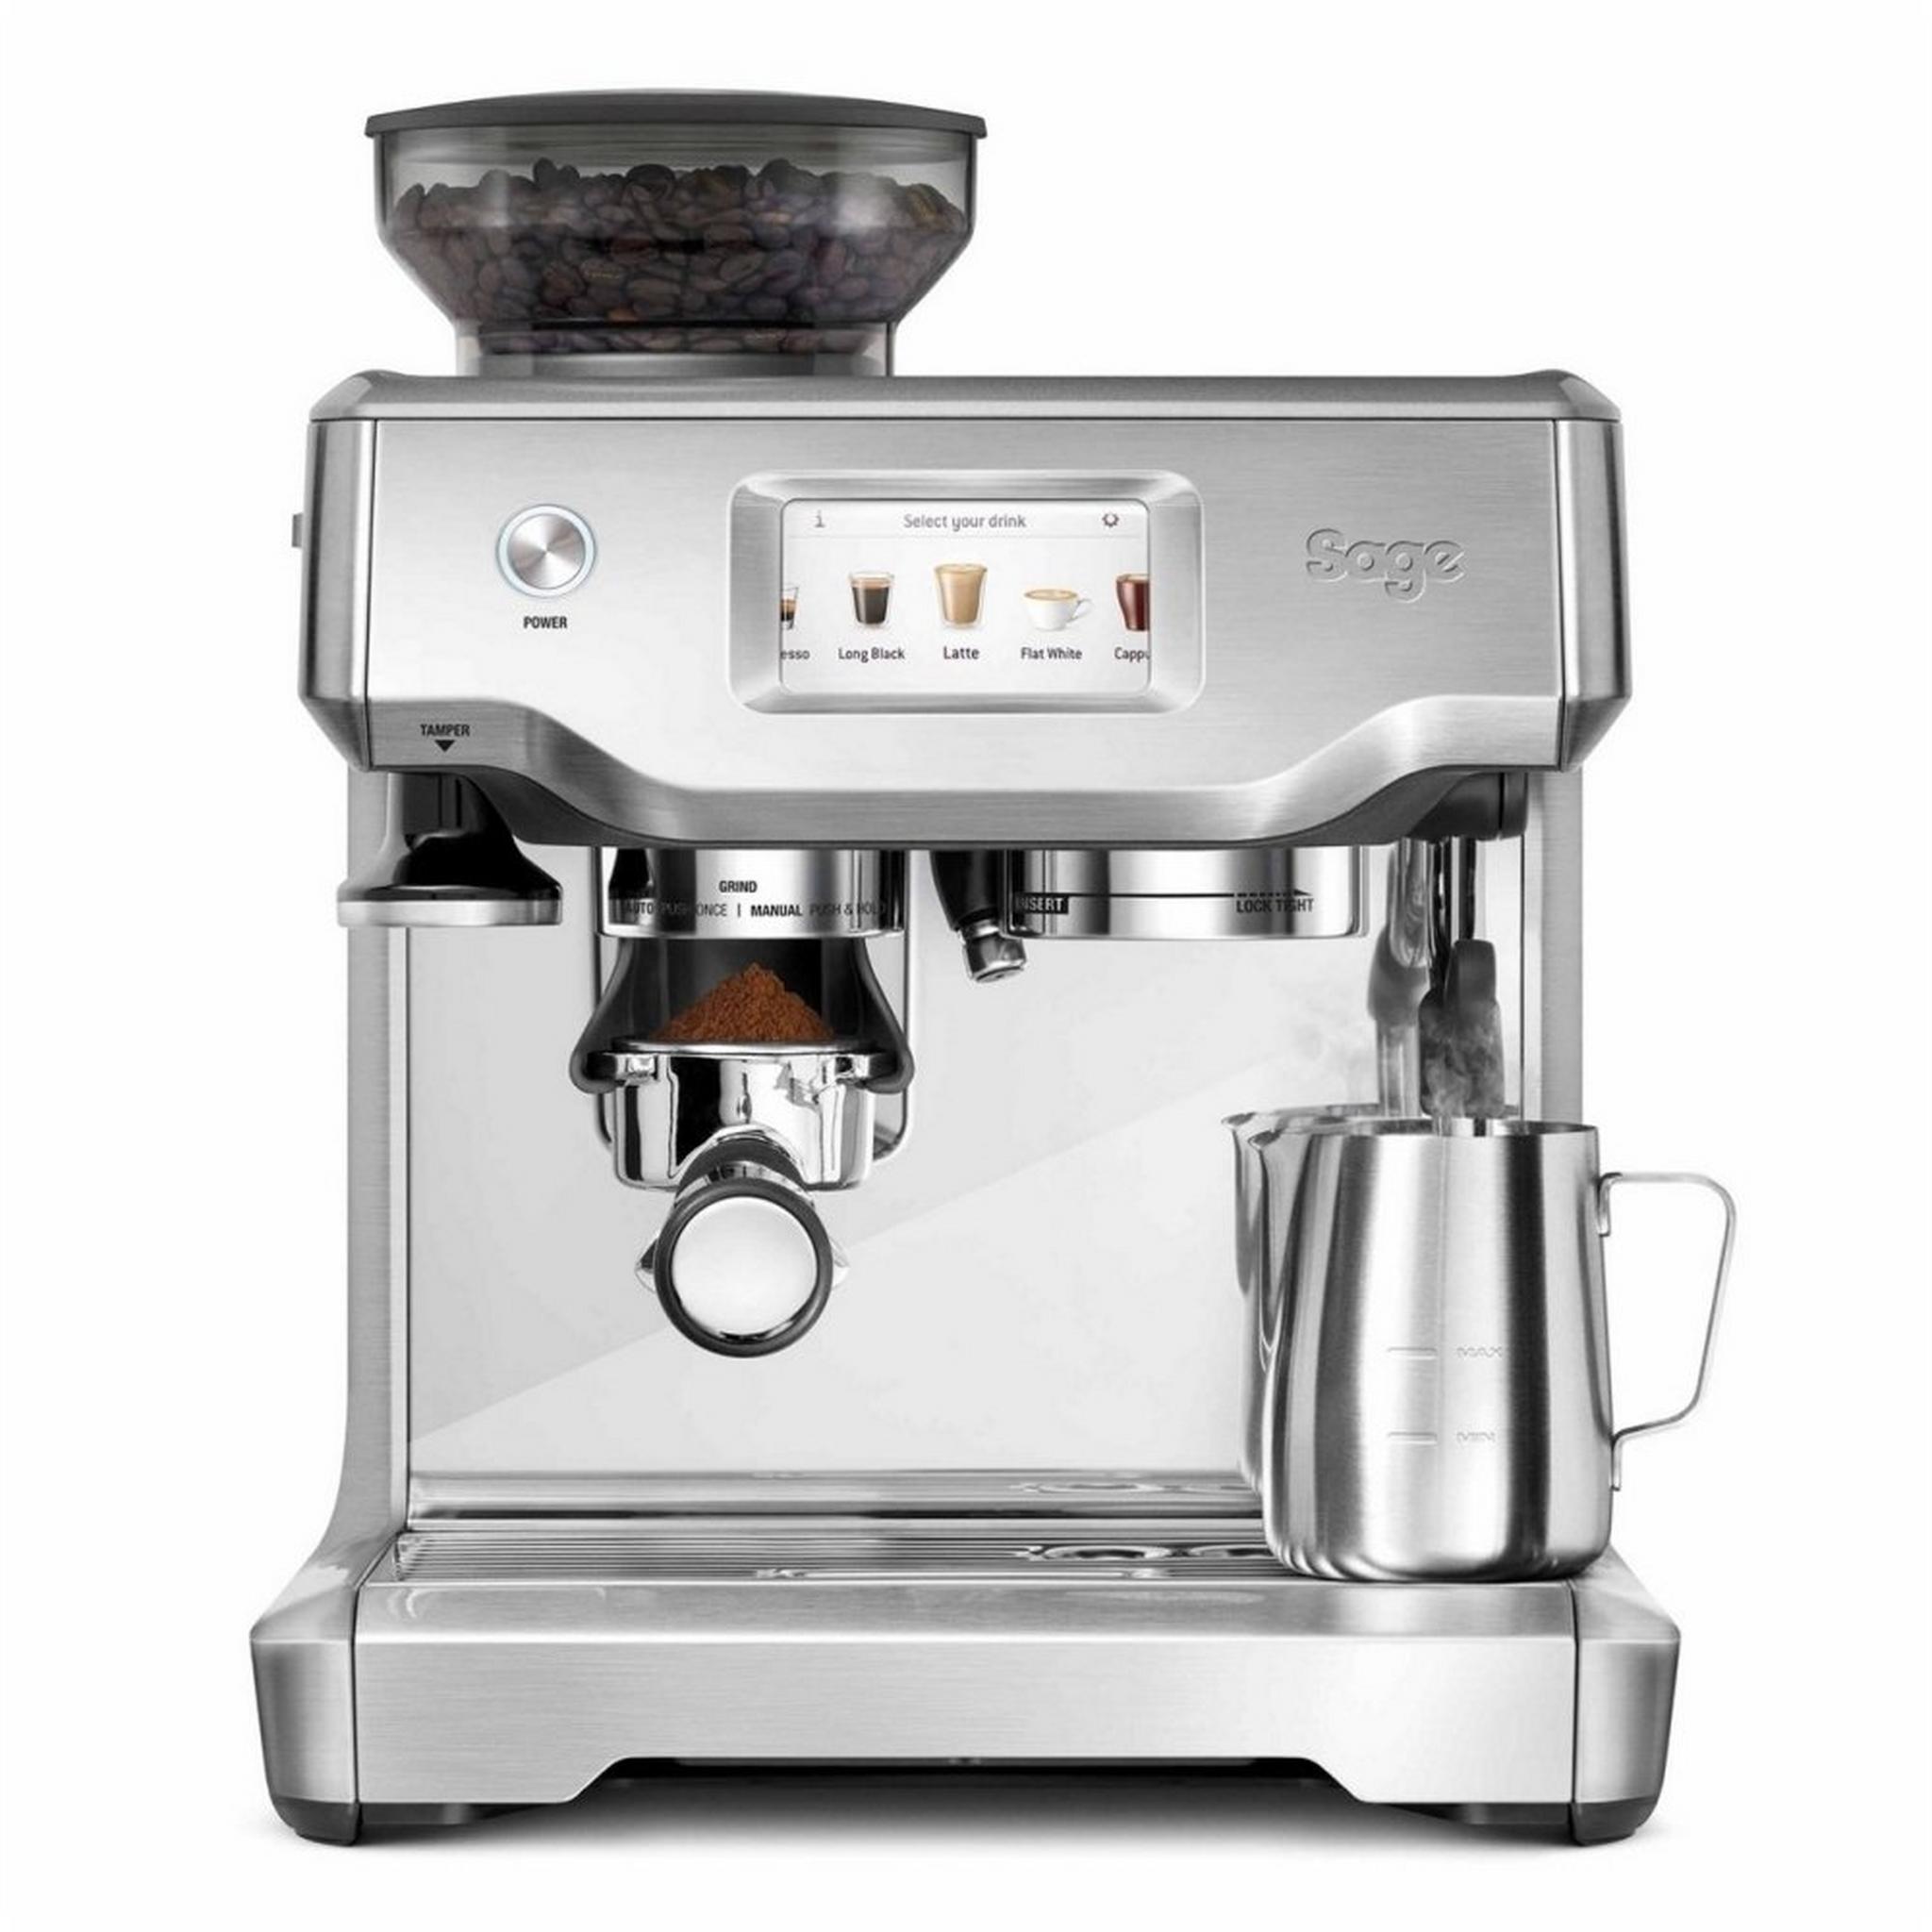 Sage Barista Touch Espresso Coffee Maker, 1680W, 2L, SES880BSS - Stainless Steel